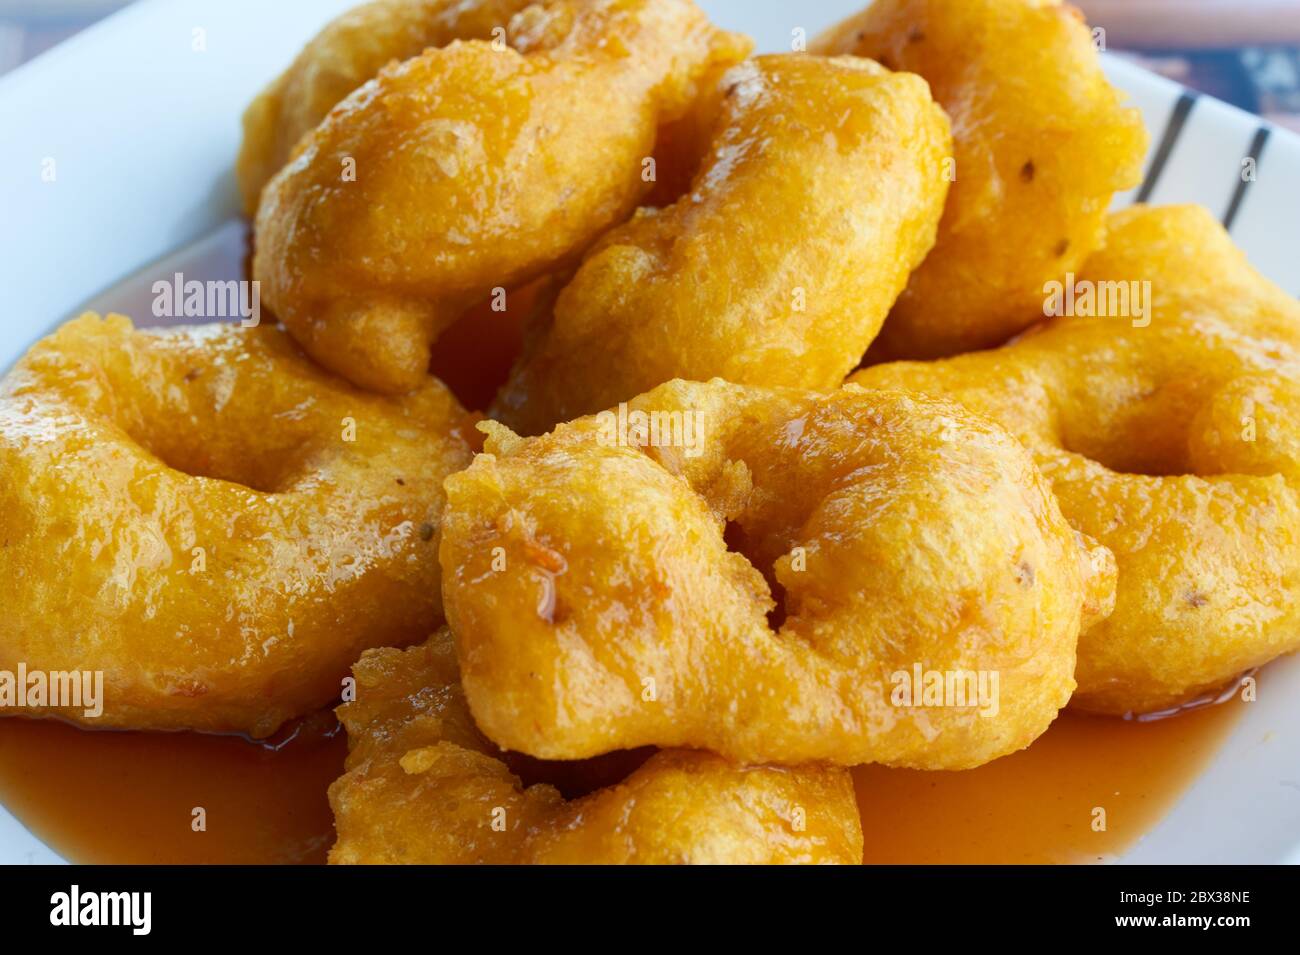 Picarones: These are ring-shaped dessert made with wheat flour dough mixed with pumpkin and sweet potato. fried and dipped in fig molasses. Stock Photo